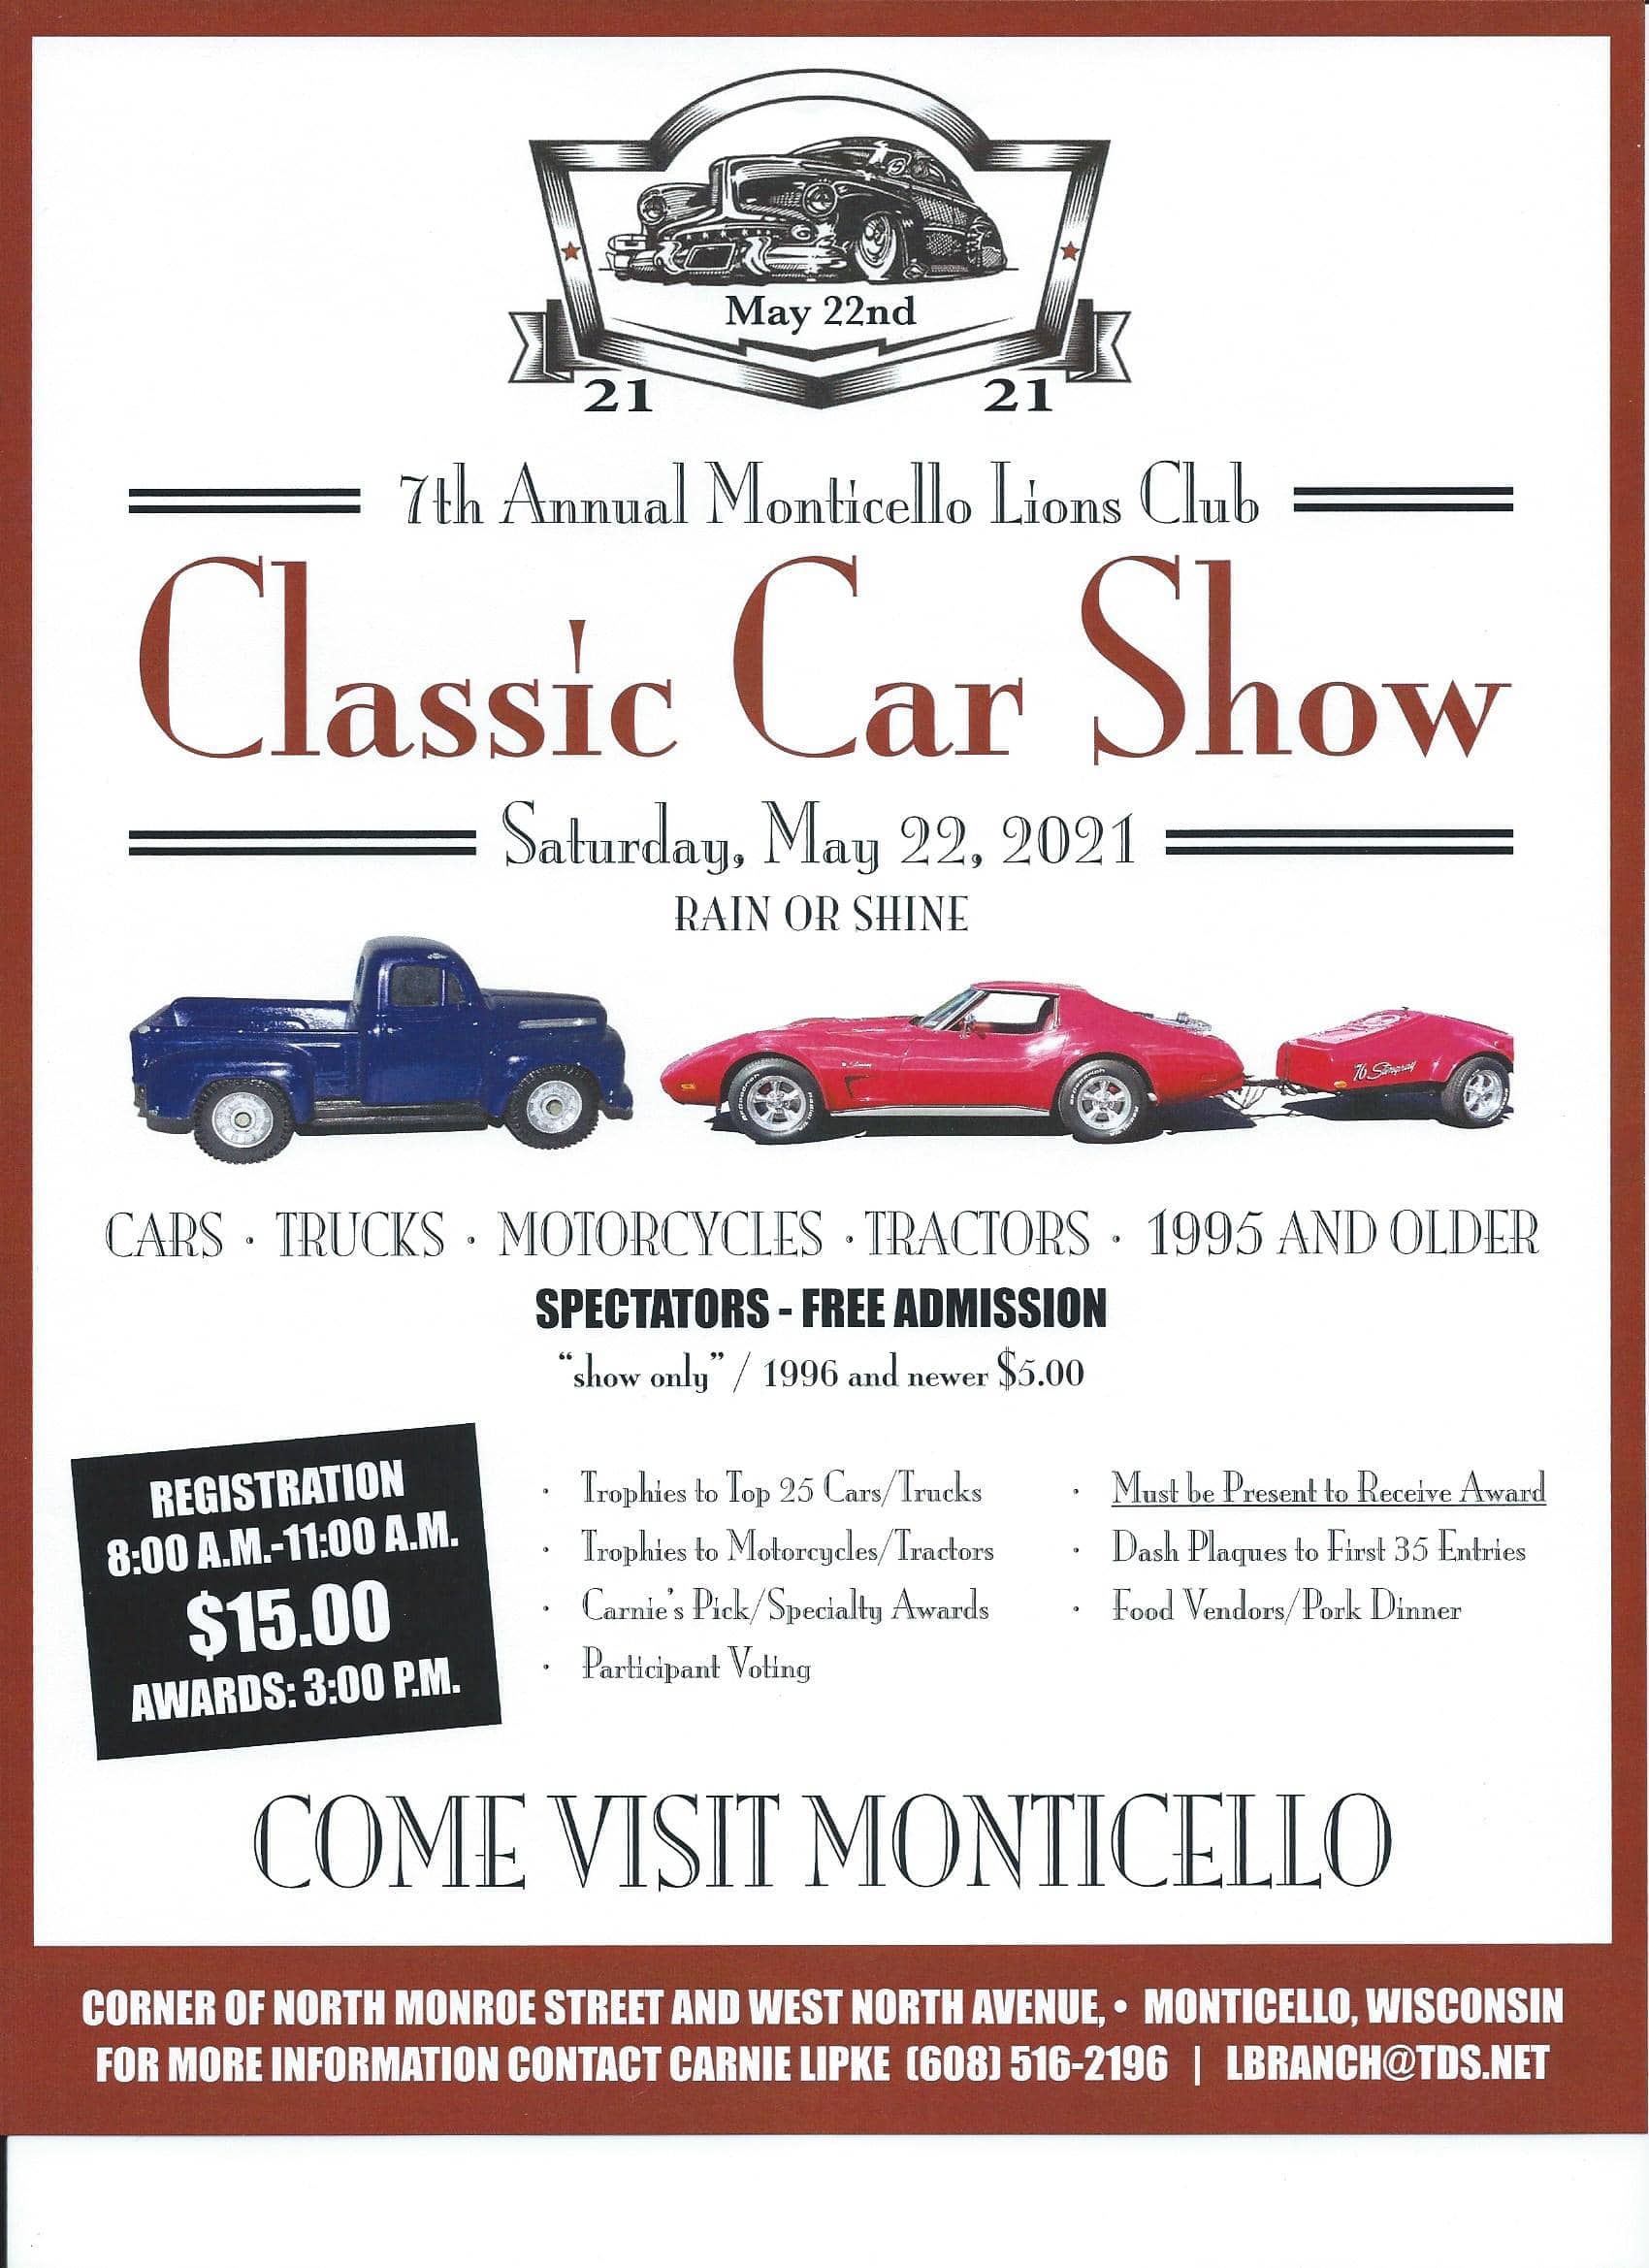 7th Annual Monticello Lions Club Classic Car Show WBEL The Beat 92.